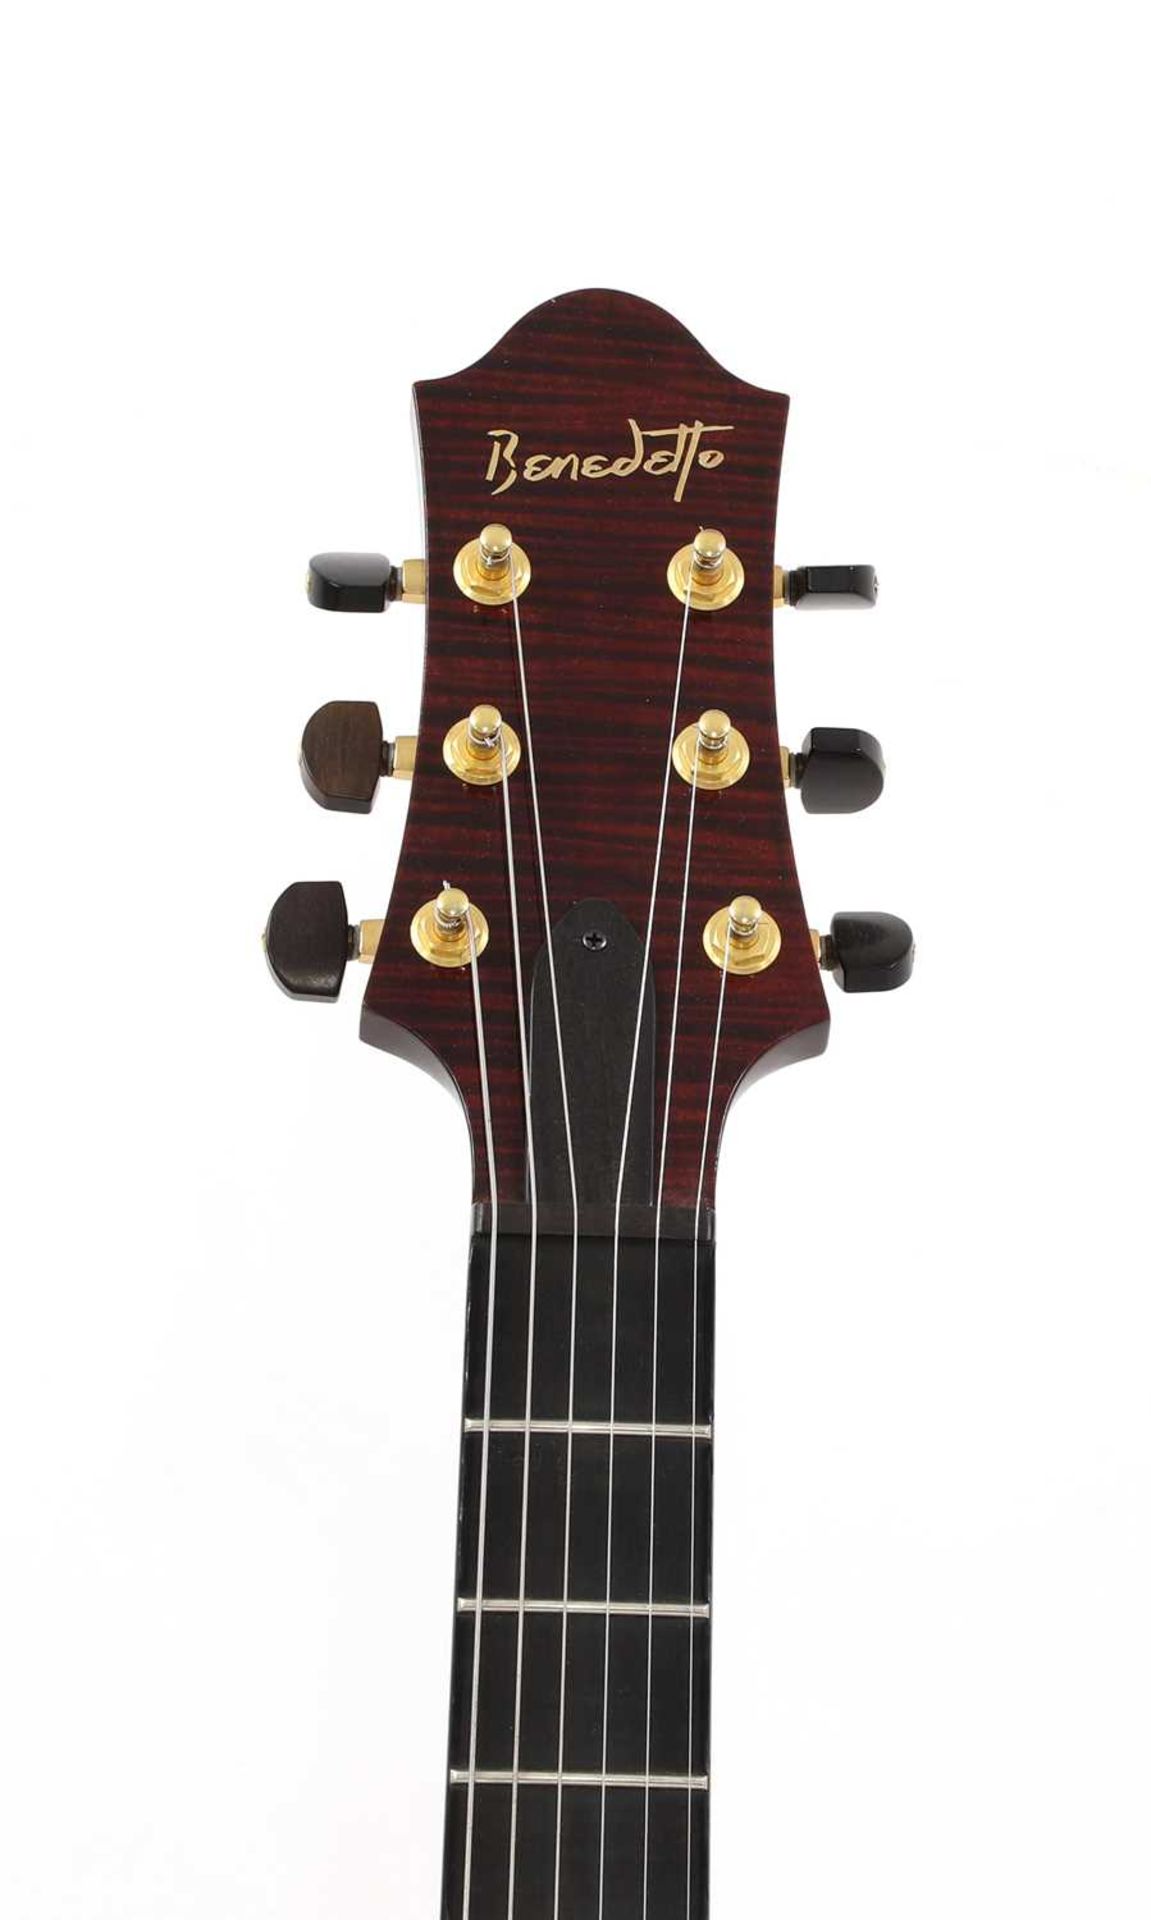 A Benedetto 'Benny' electric guitar, - Image 4 of 4